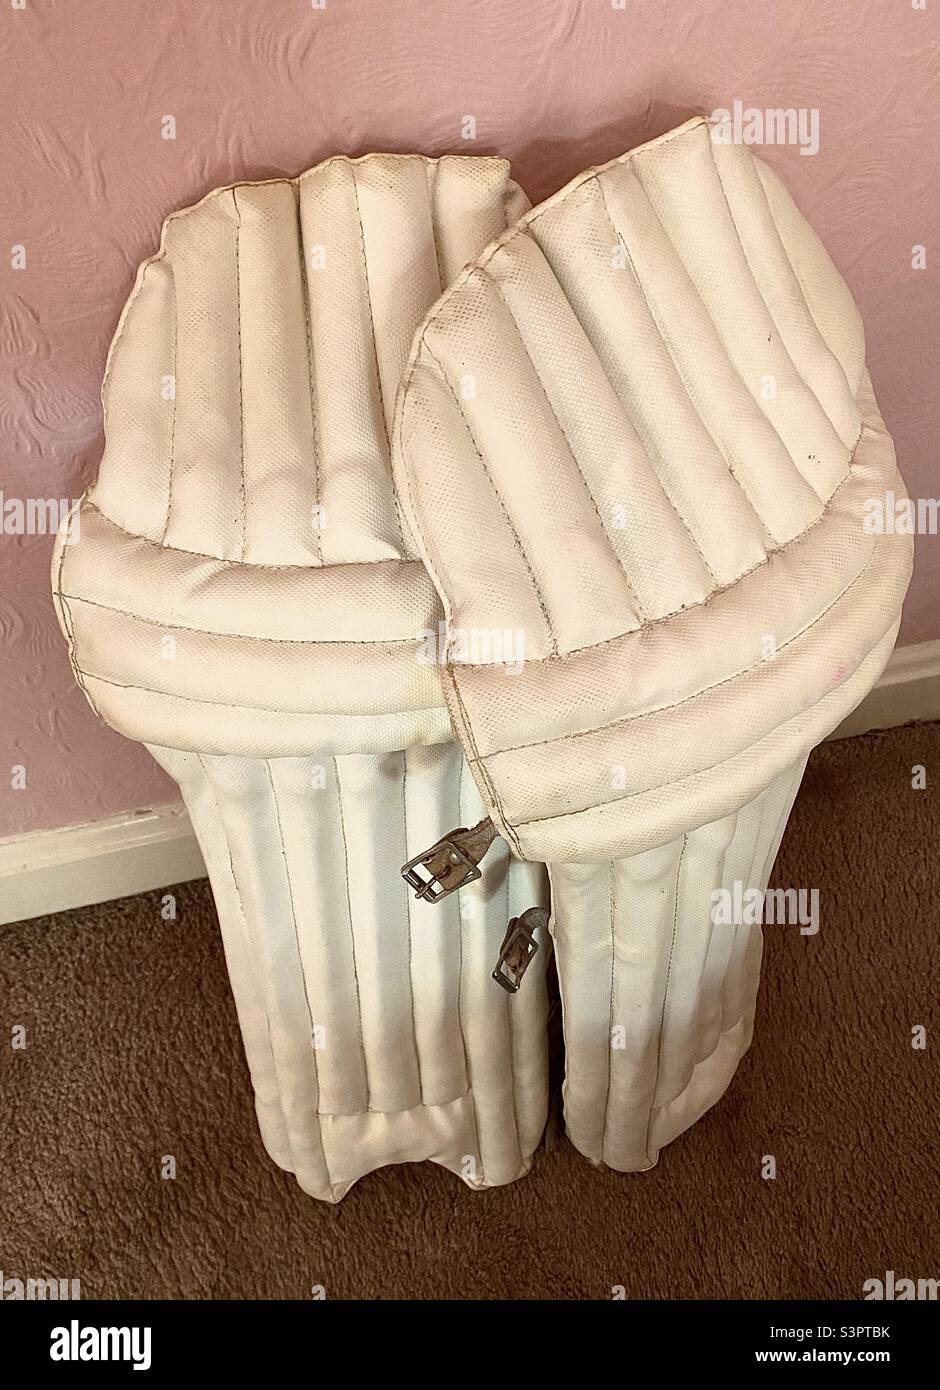 Cricket (batting) pads awaiting putting into the cricket bag alongside other equipment for the game. These leg guards are essential protection for a cricketer alongside other equipment. Stock Photo